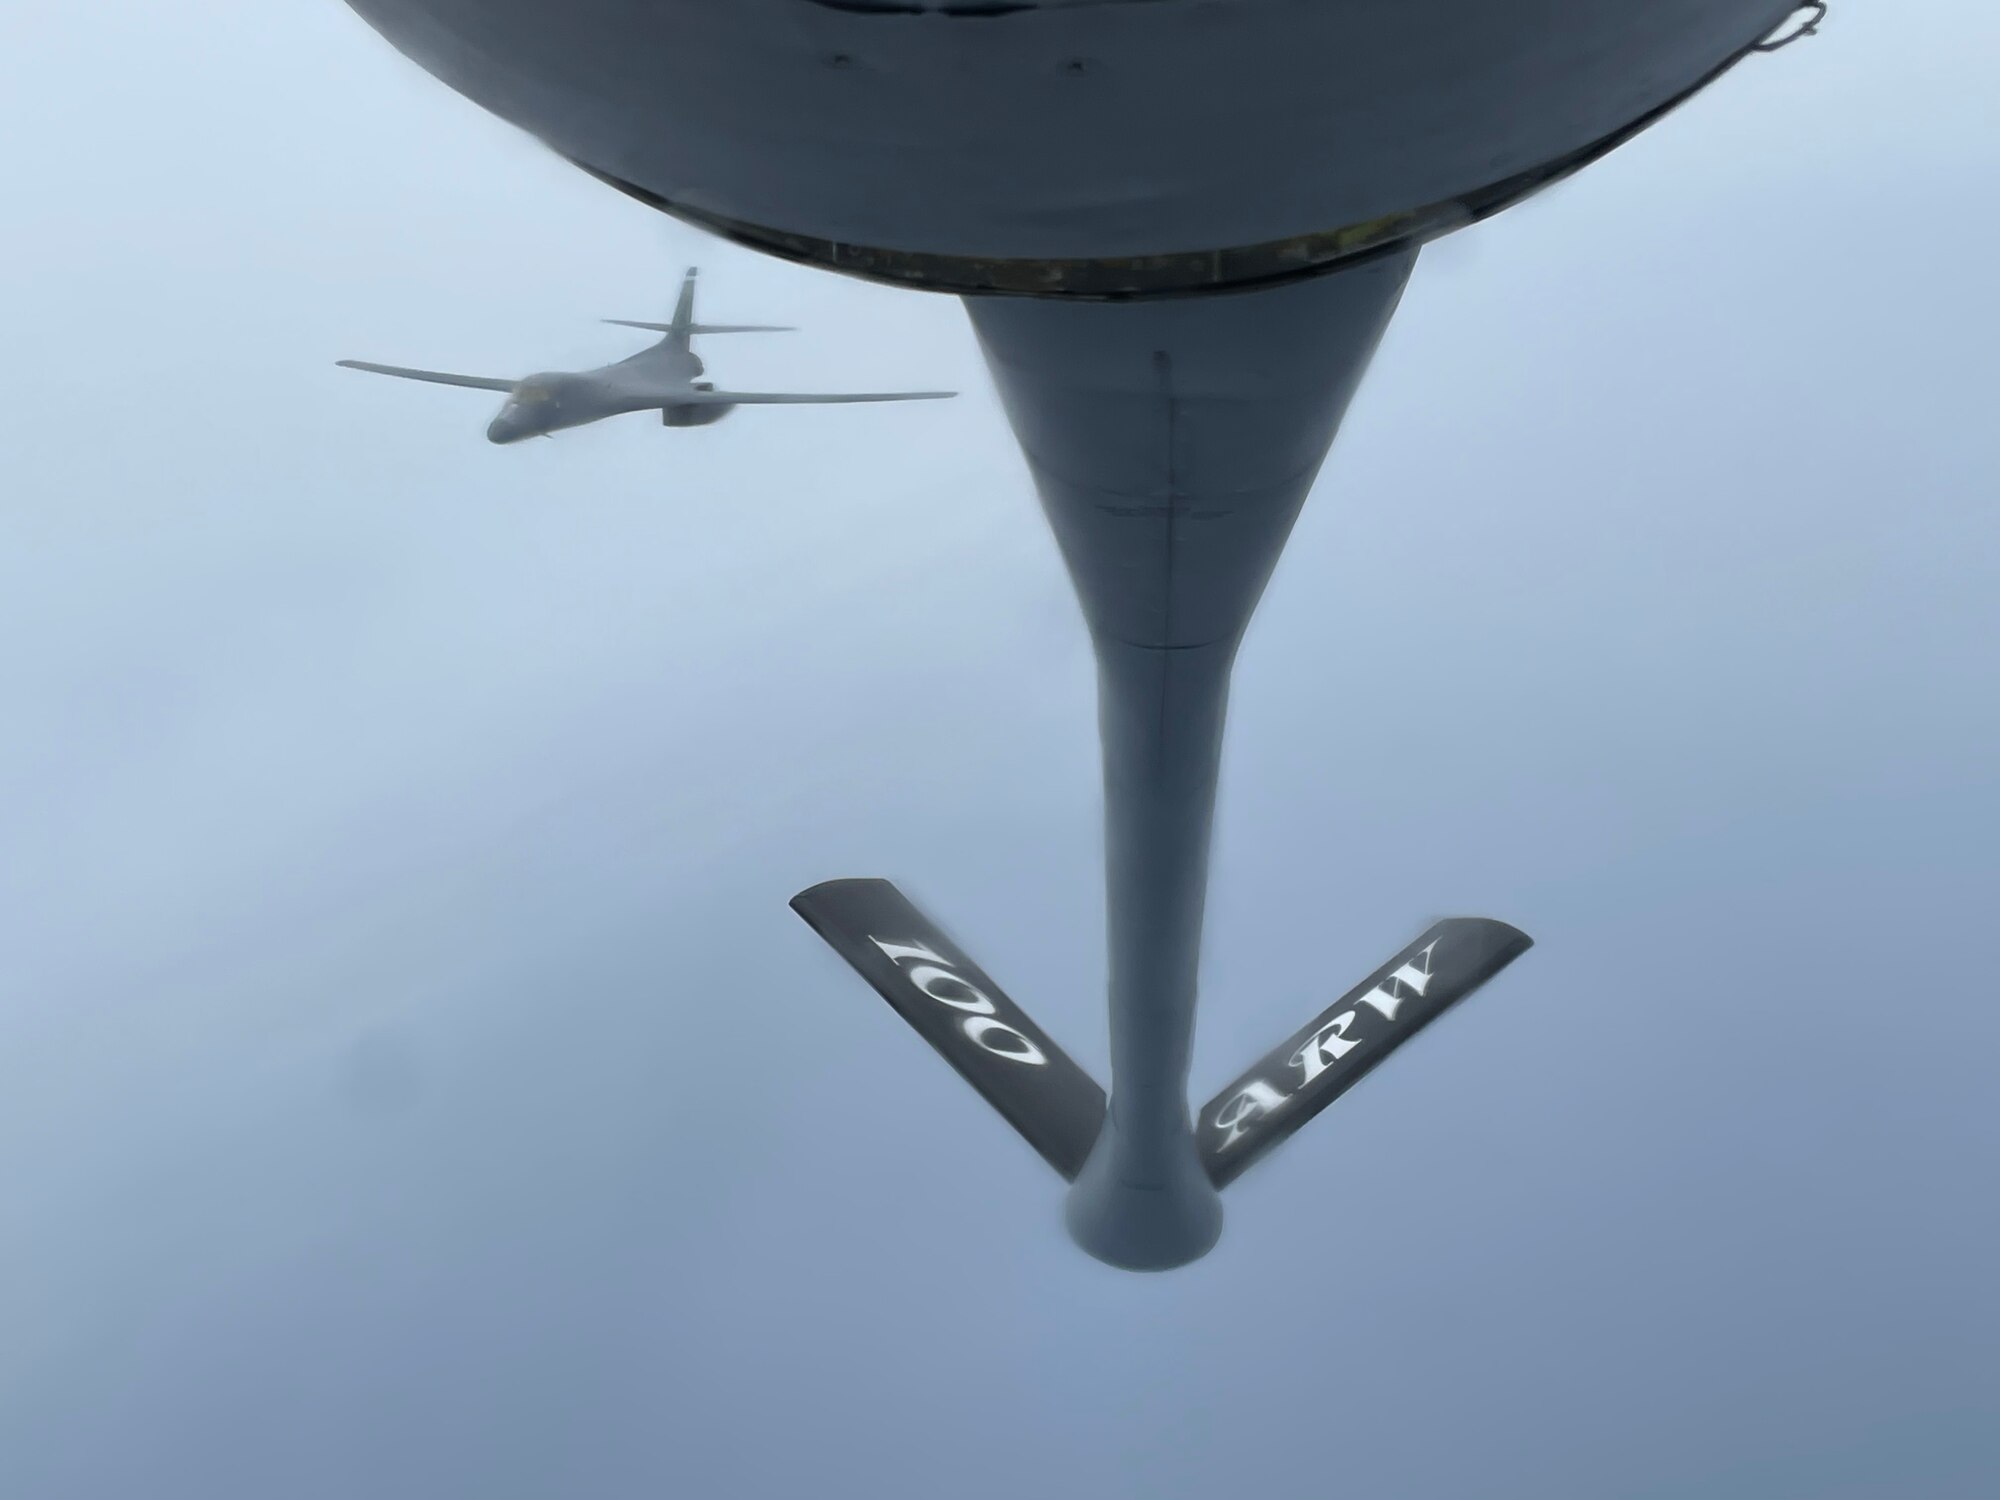 A U.S. Air Force B-1B Lancer aircraft assigned to the 9th Expeditionary Bomb Squadron departs from a KC-135 Stratotanker aircraft assigned to the 100th Air Refueling Wing, Royal Air Force Mildenhall, England, after receiving fuel during exercise Castle Forge off the coast of Norway, Nov. 1, 2021. Training with joint and combined allies and partners increases lethality and enhances interoperability, allowing U.S. forces to counter military aggression and coercion by sharing responsibilities for common defense. Alongside F-15 operations in the Black Sea Region, Castle Forge encompasses the USAFE MAJCOM-wide Agile Combat Employment Initial Operating Capability capstone event. Both Castle Forge’s components will better enable forces to quickly disperse and continue to deliver air power from locations with varying levels of capacity and support, ensuring Airmen are always ready to respond to potential threats. (U.S. Air Force photo by Senior Airman Joseph Barron)